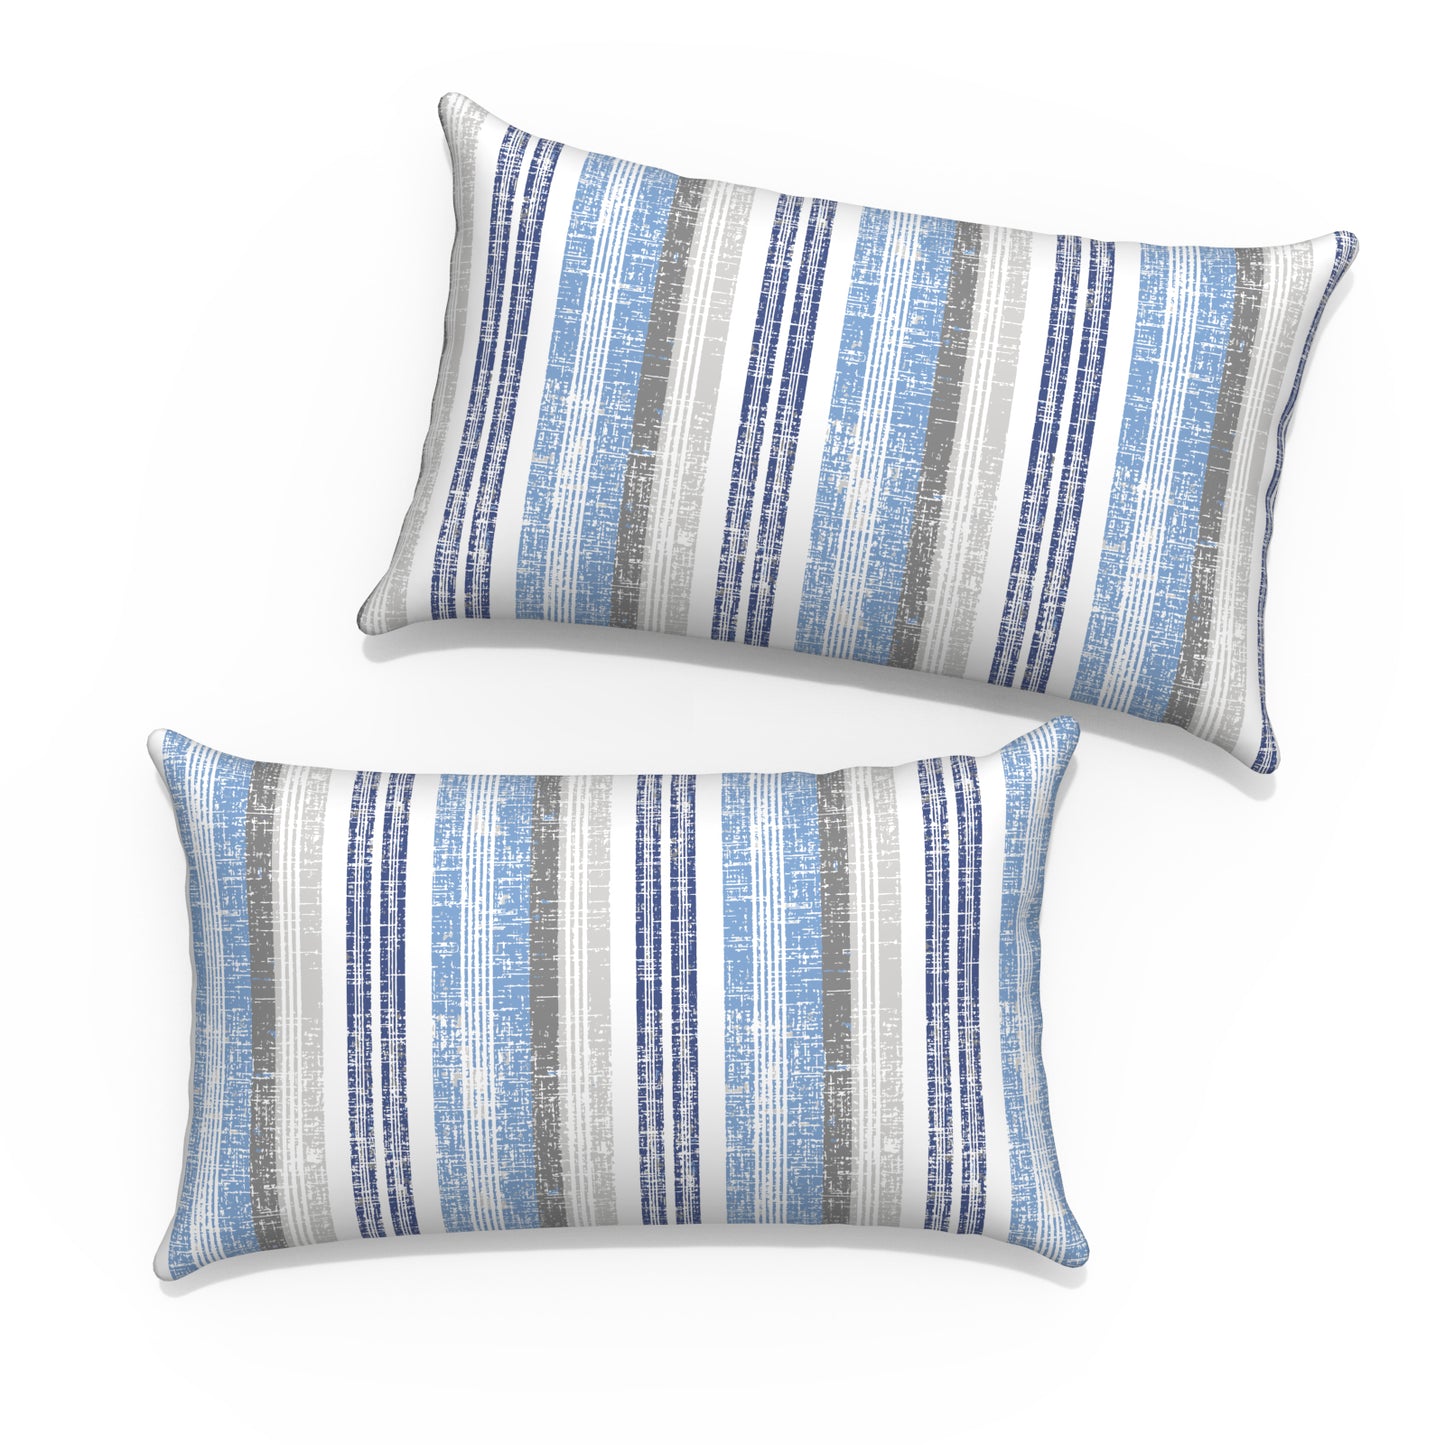 Melody Elephant Pack of 2 Outdoor Lumbar Pillow Covers, All Weather Cushion Pillow Cases 12x20 Inch, Pillowcase for Patio Couch Decoration, Stripe Layered Blue